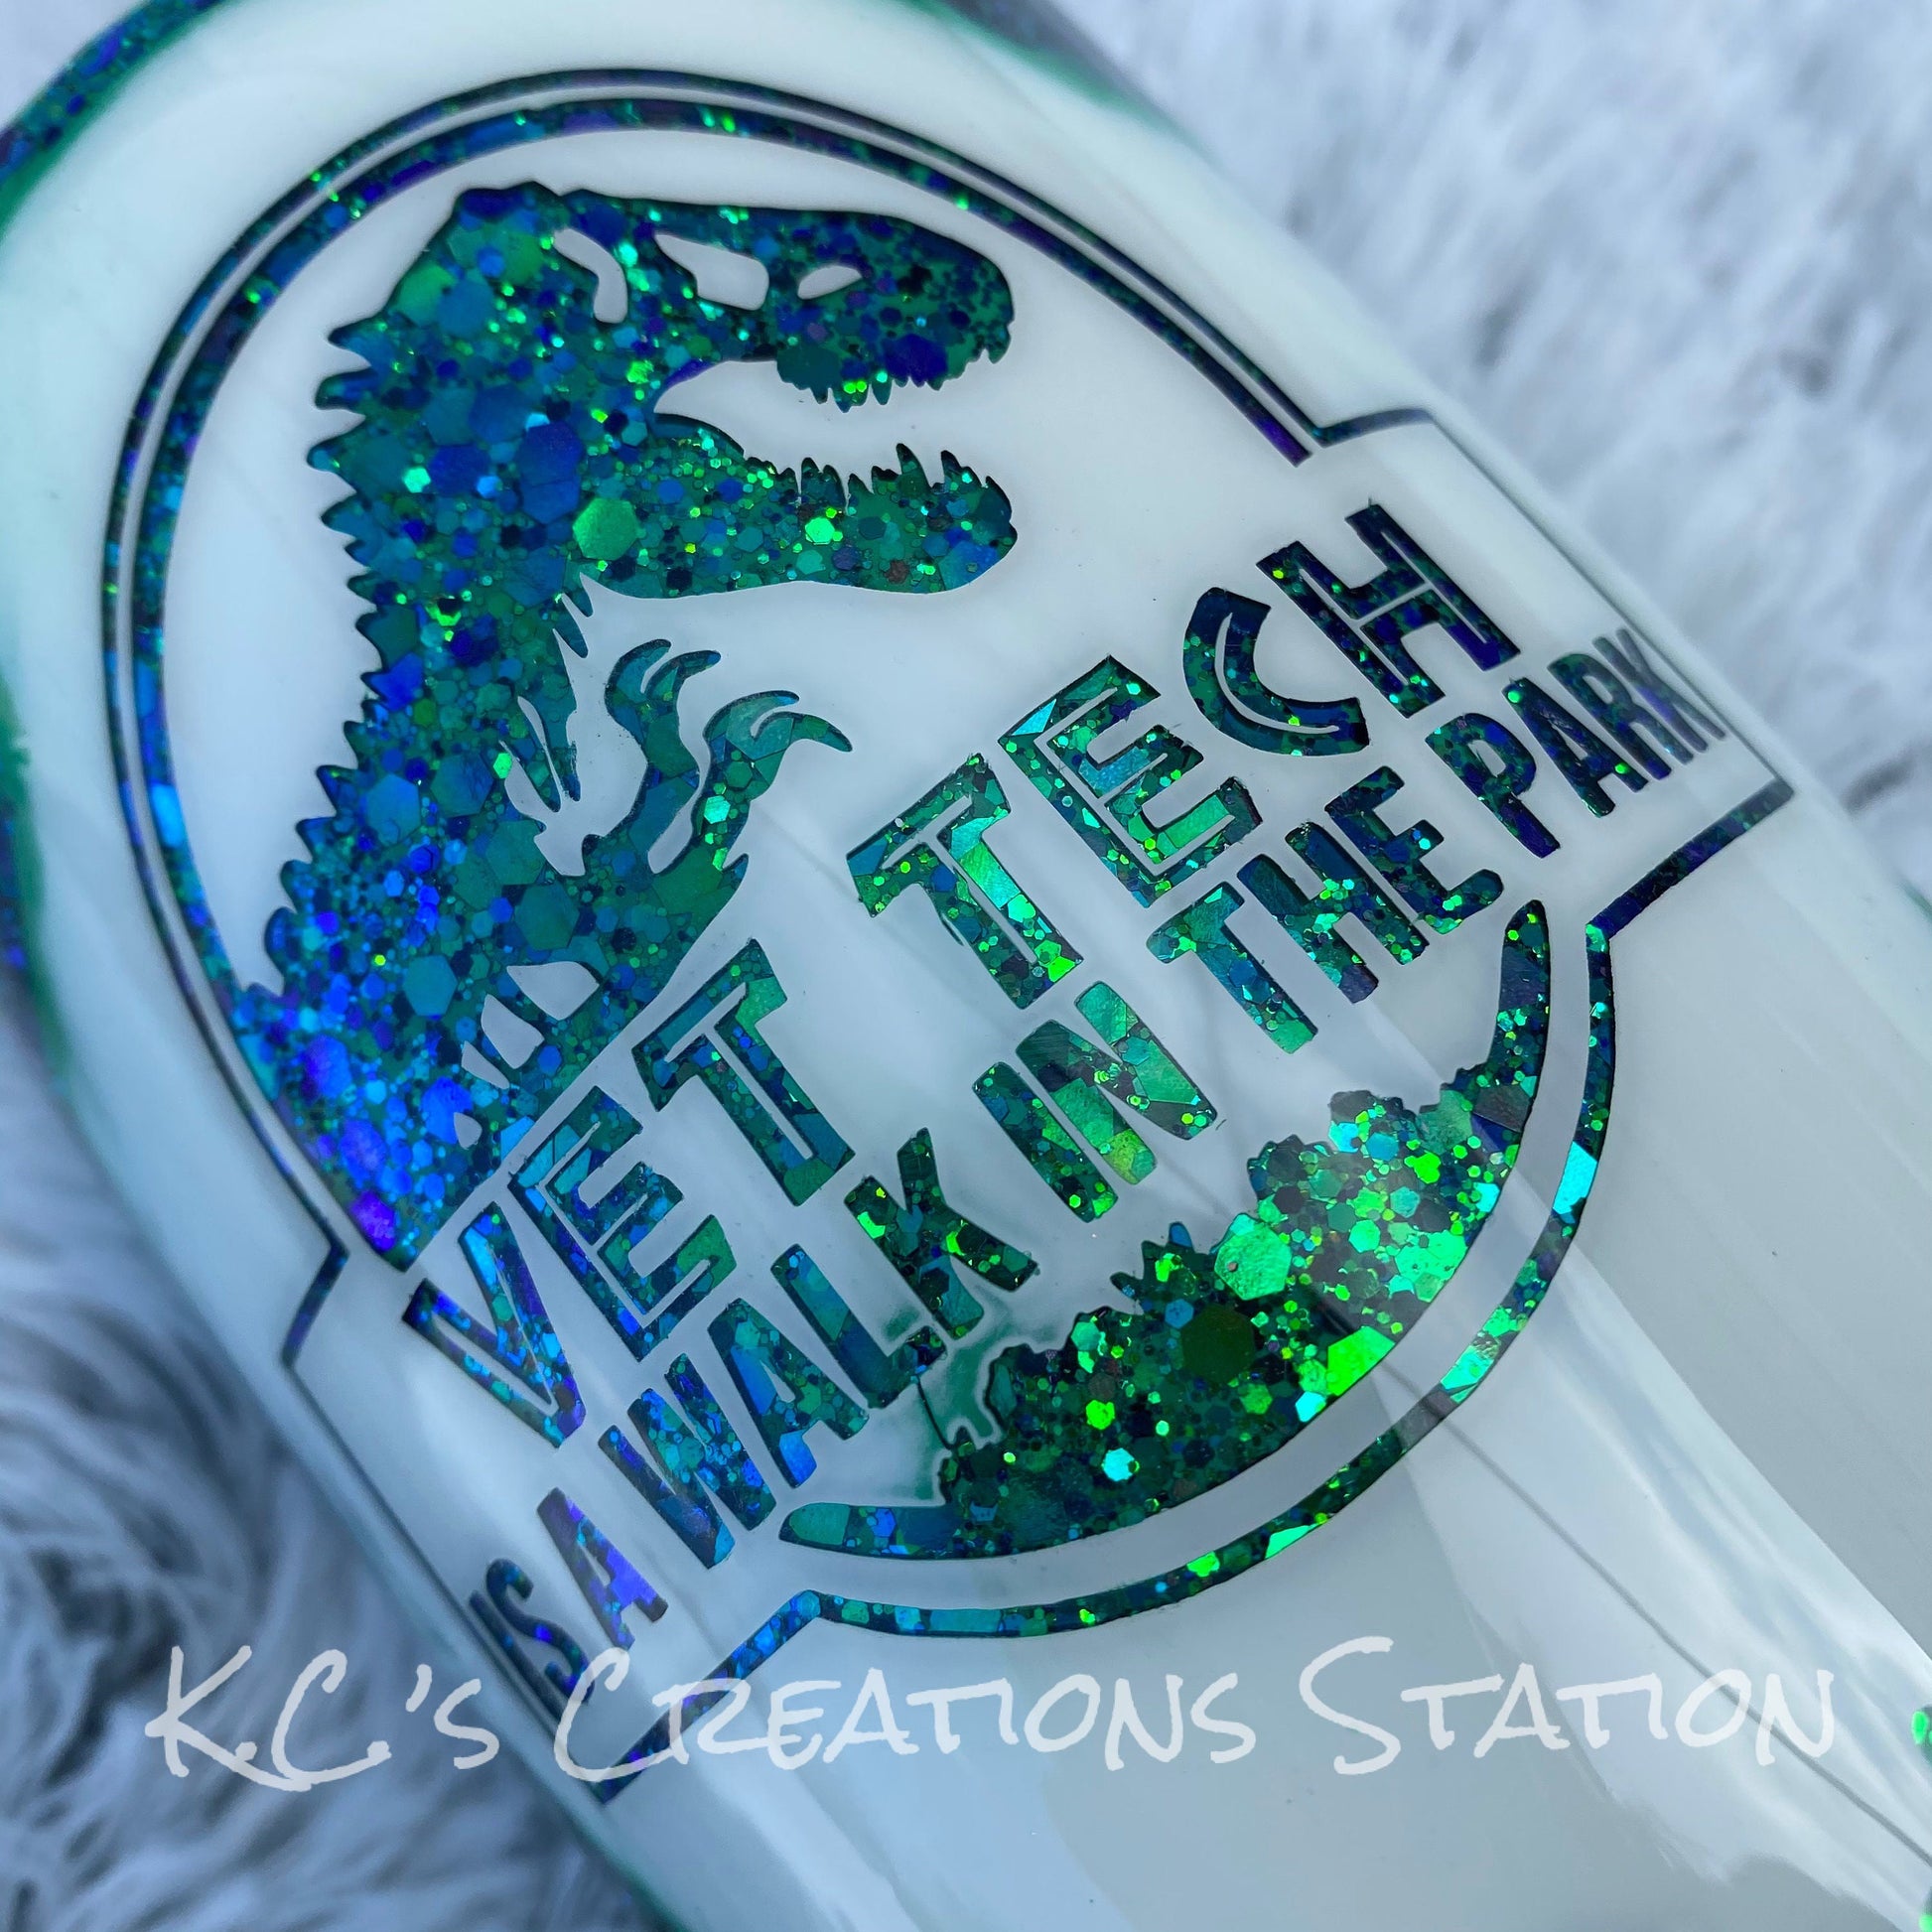 Dont Mess With Mamasaurus Glitter Tumbler Distressed Tumbler 